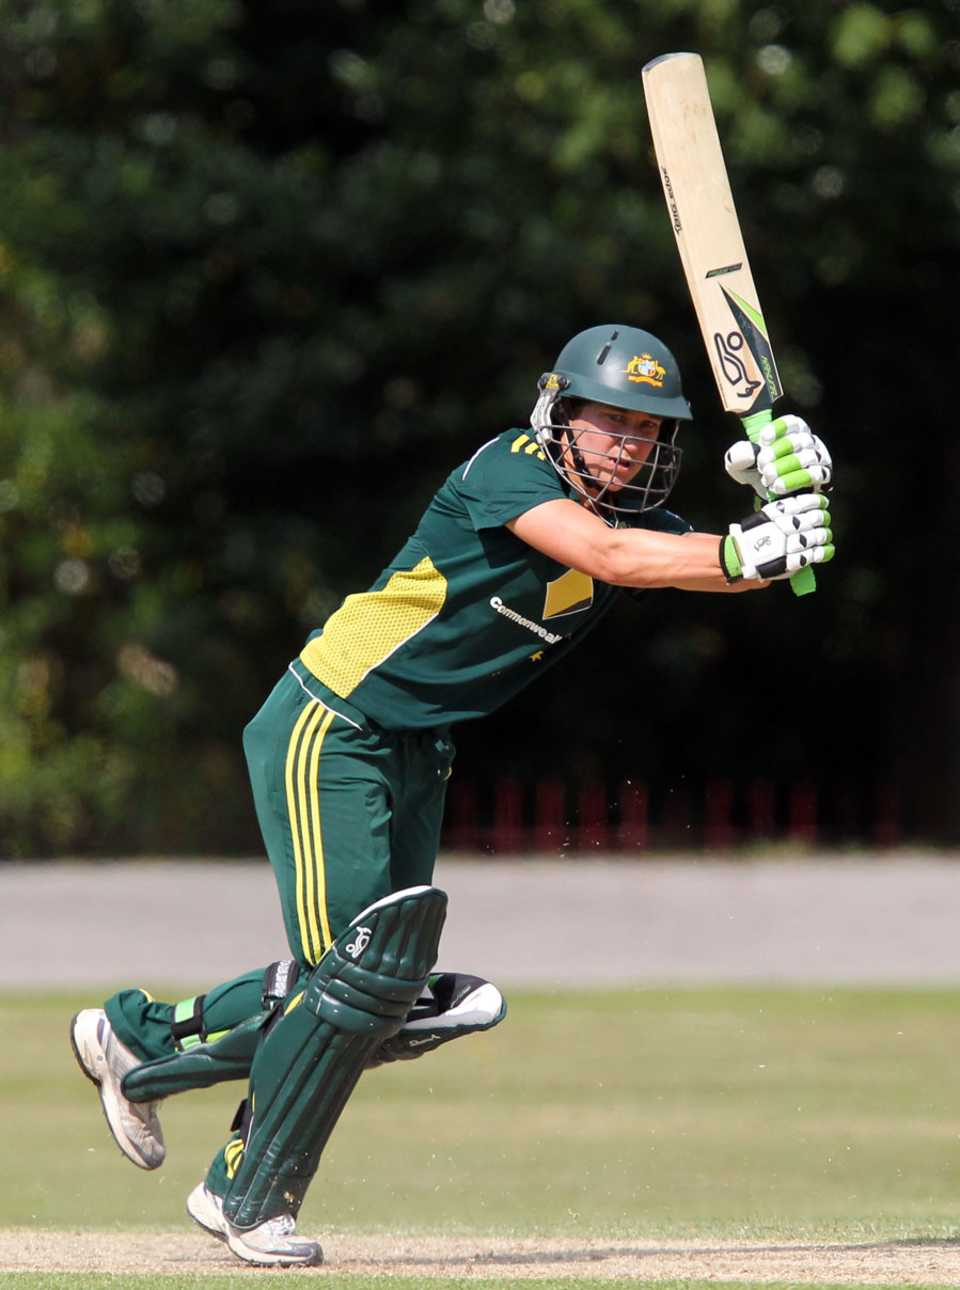 Shelley Nitschke anchored Australia's successful run chase with 78 from 100 balls